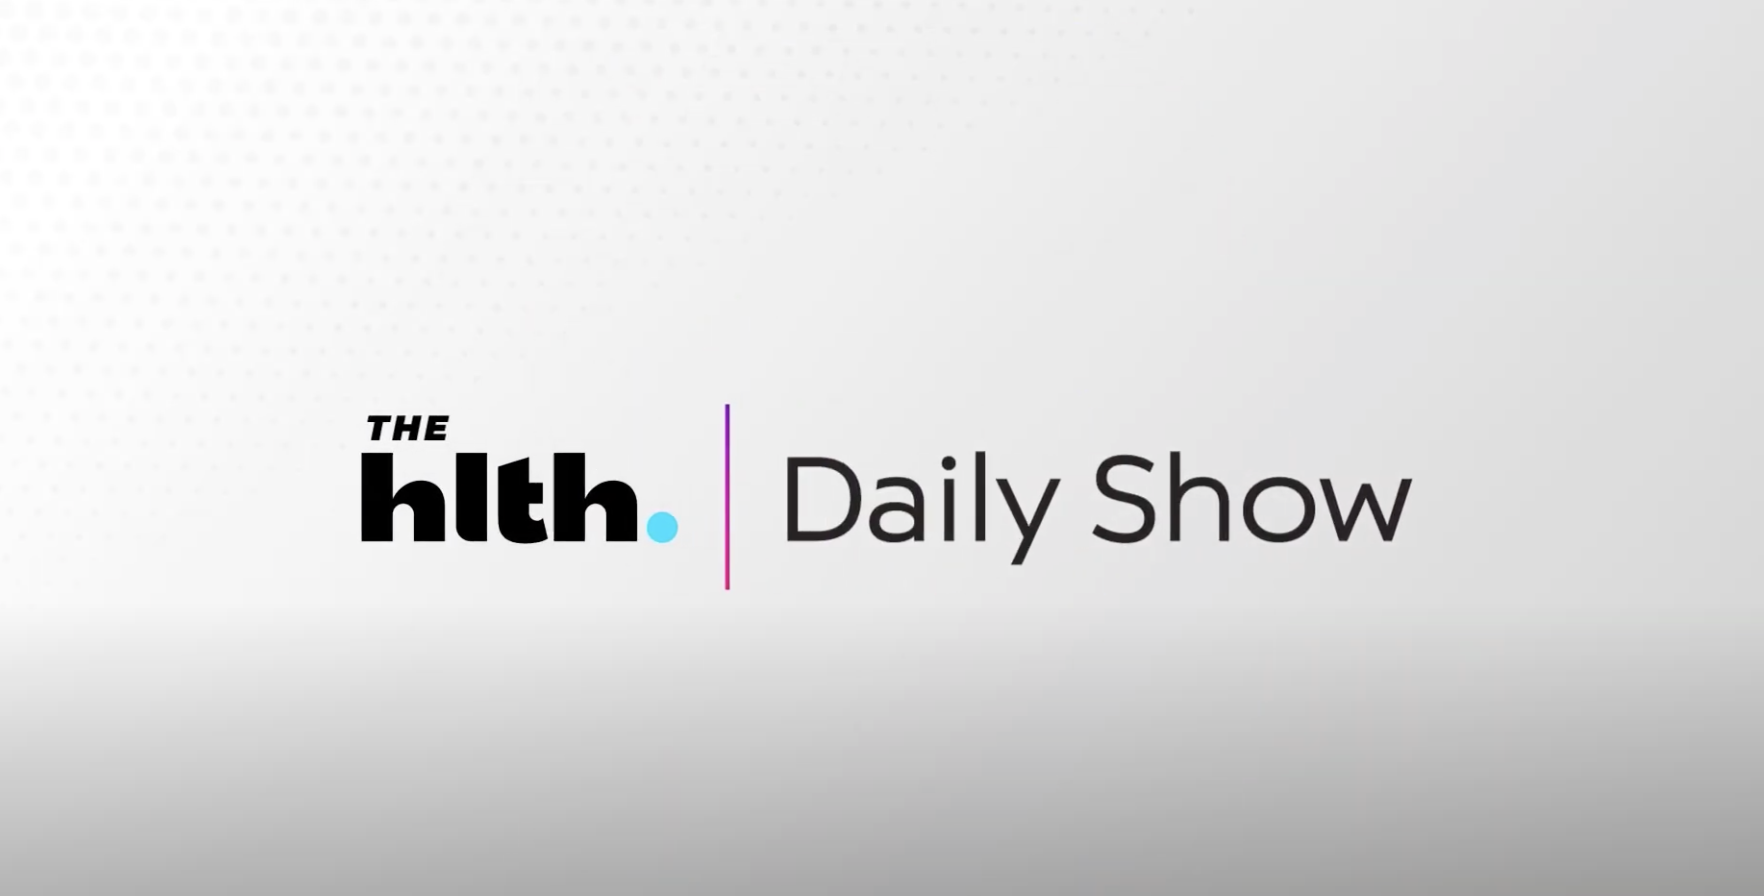 The hlth. Daily Show